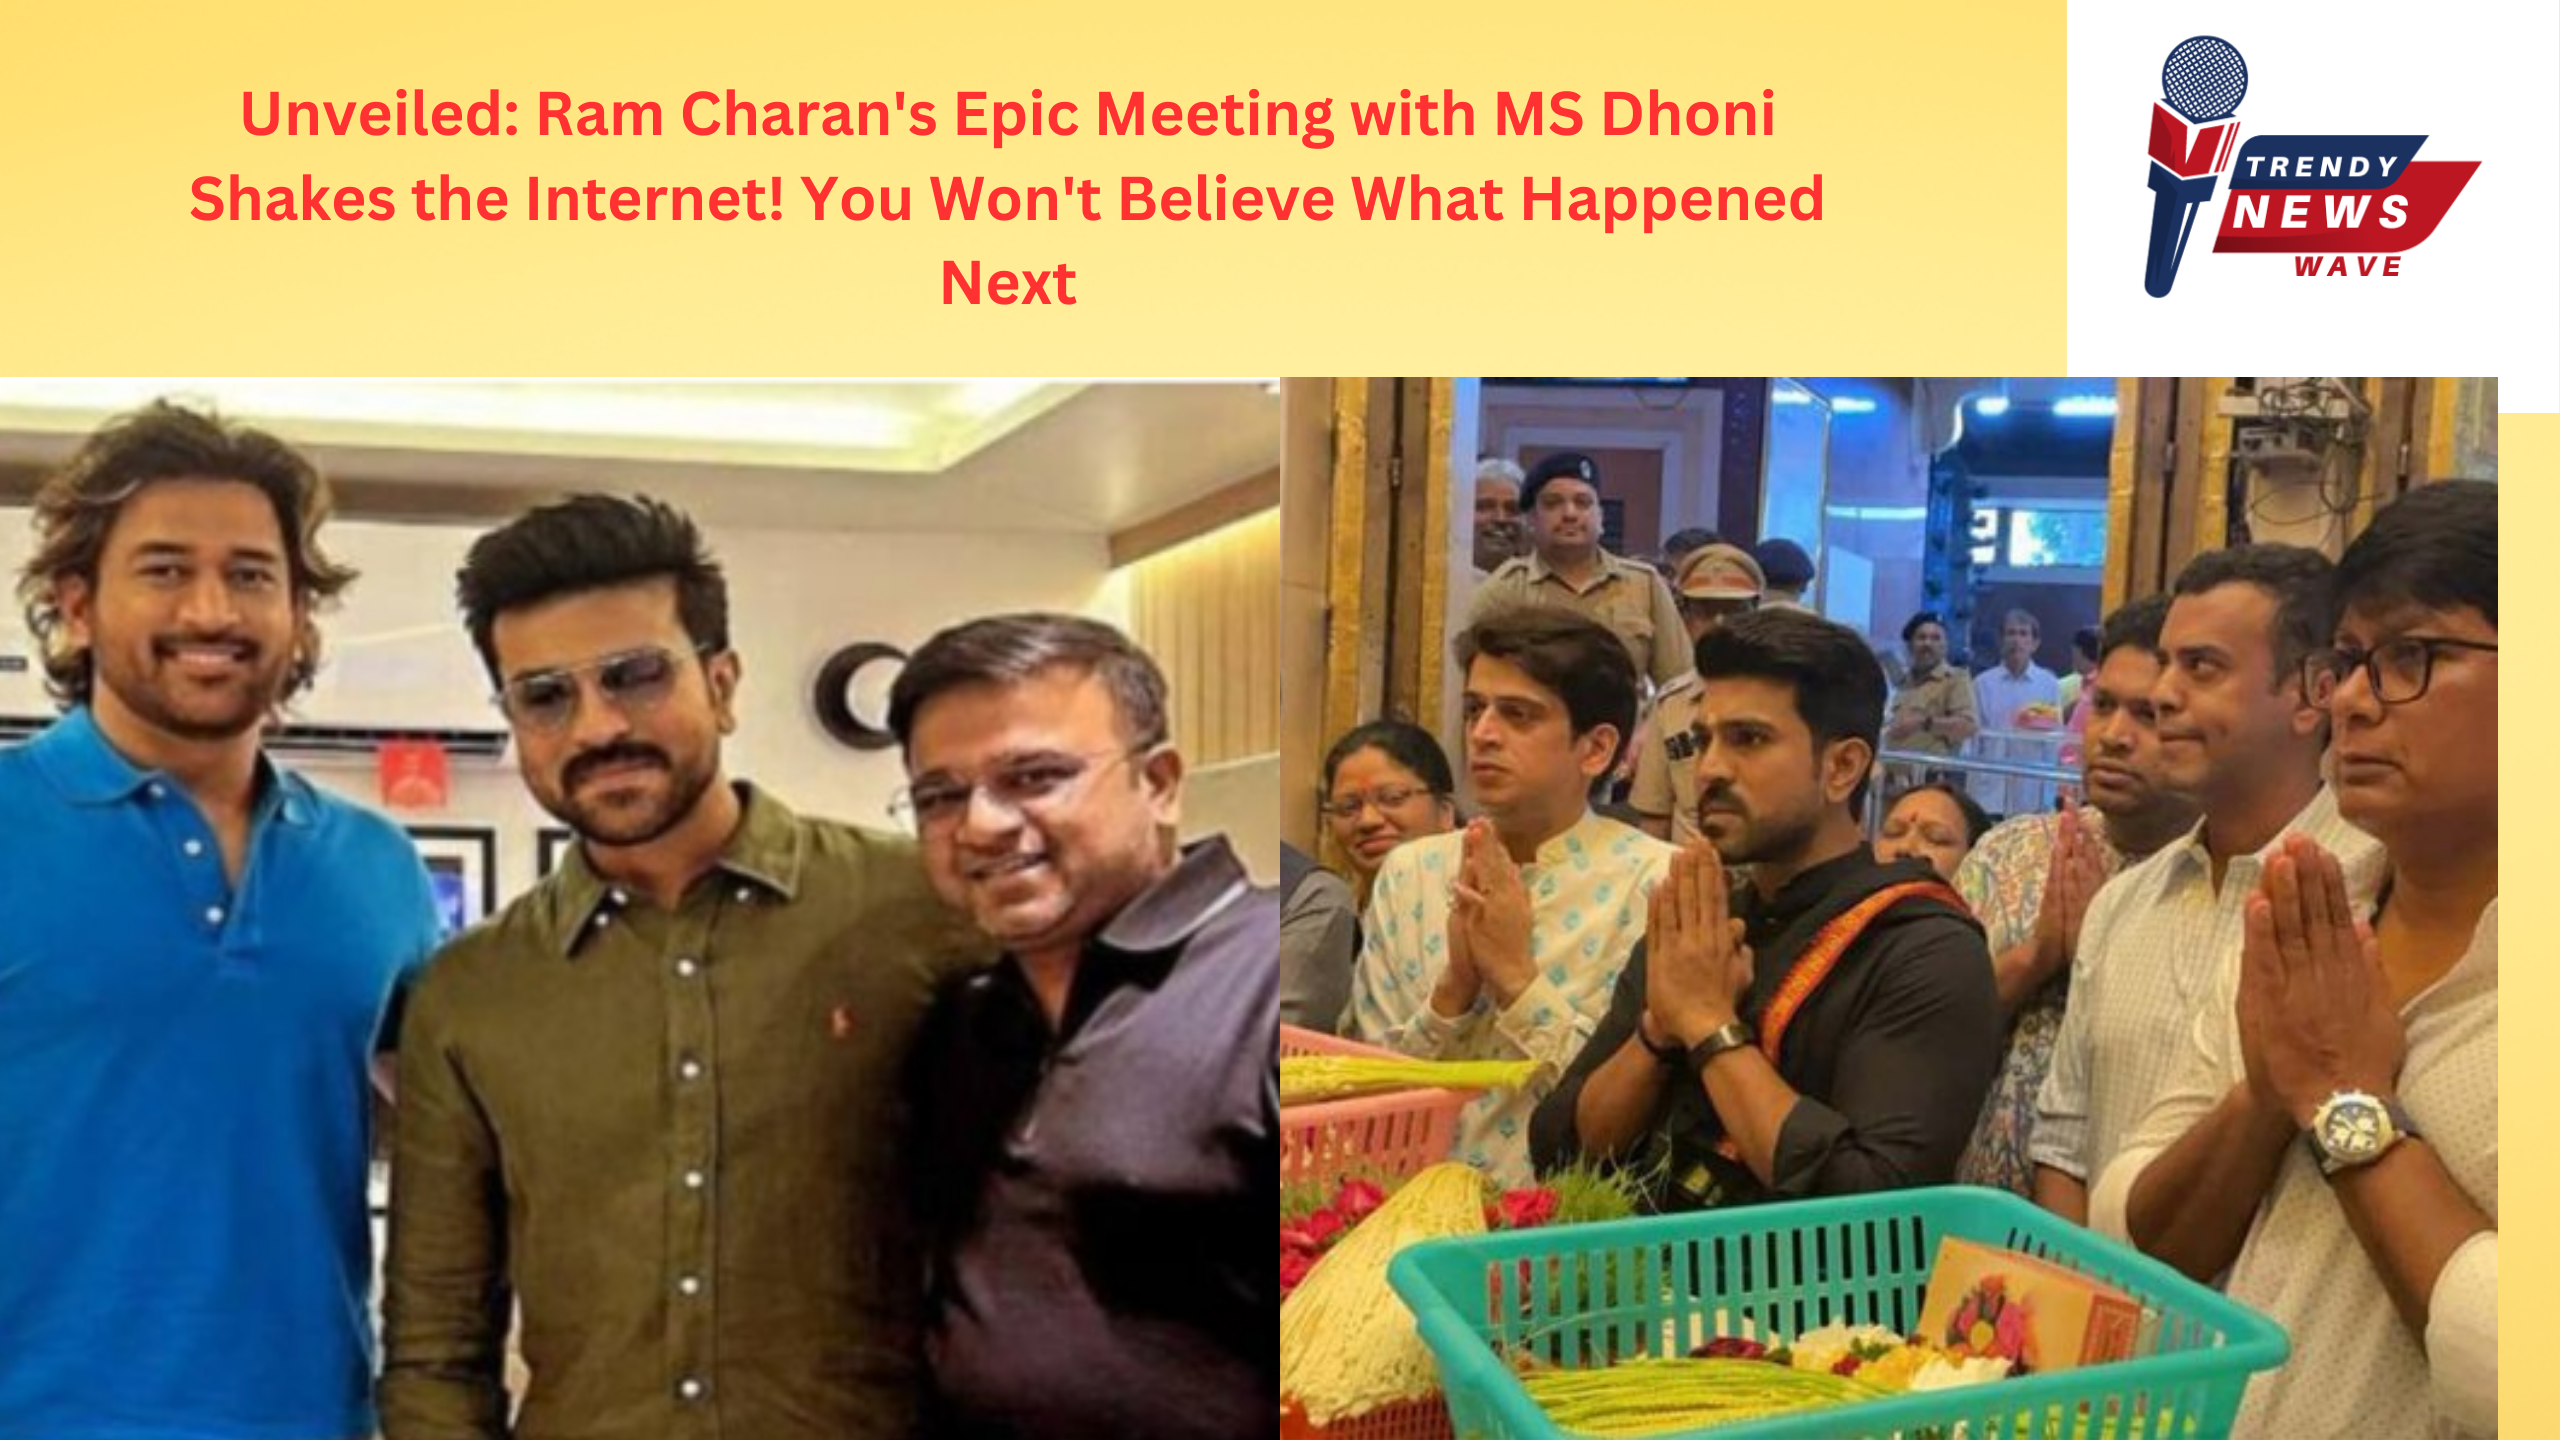 Ram Charan 's Epic Meeting with MS Dhoni